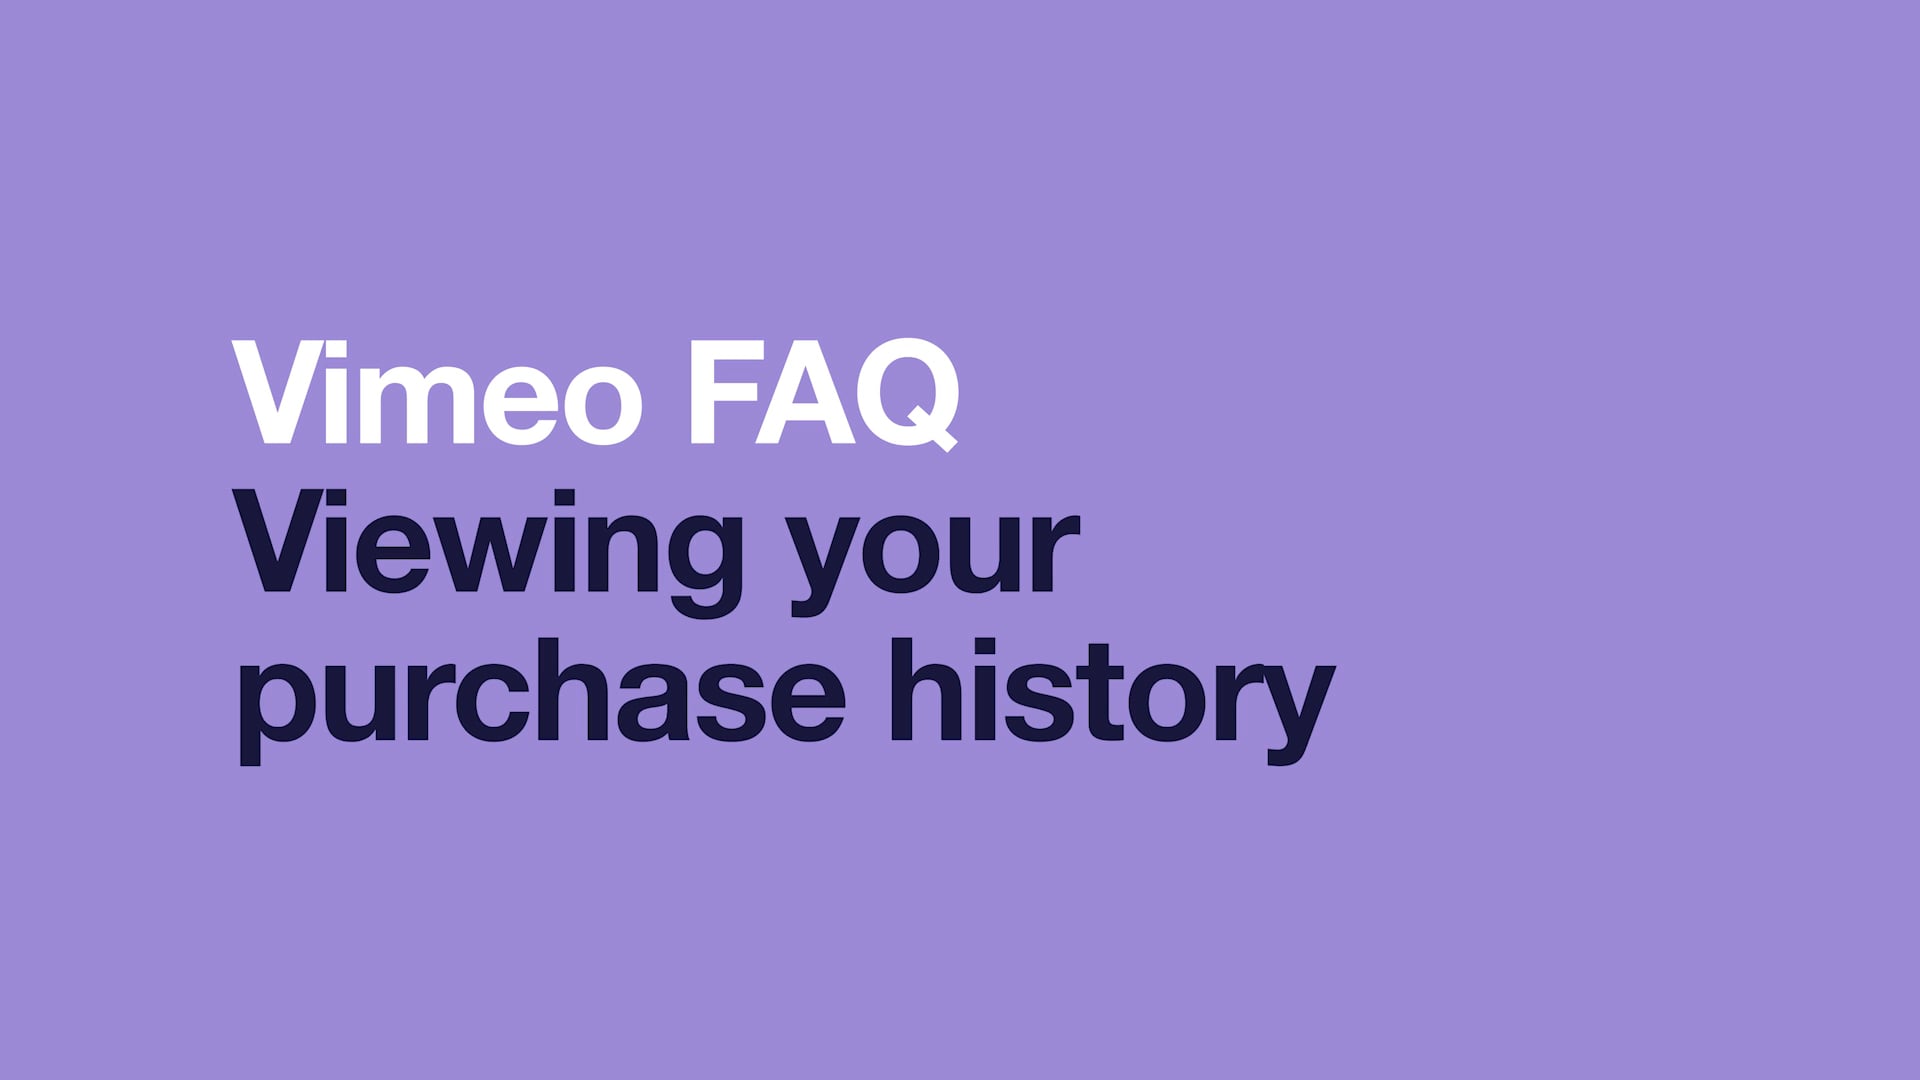 Viewing Your Purchase History on Vimeo